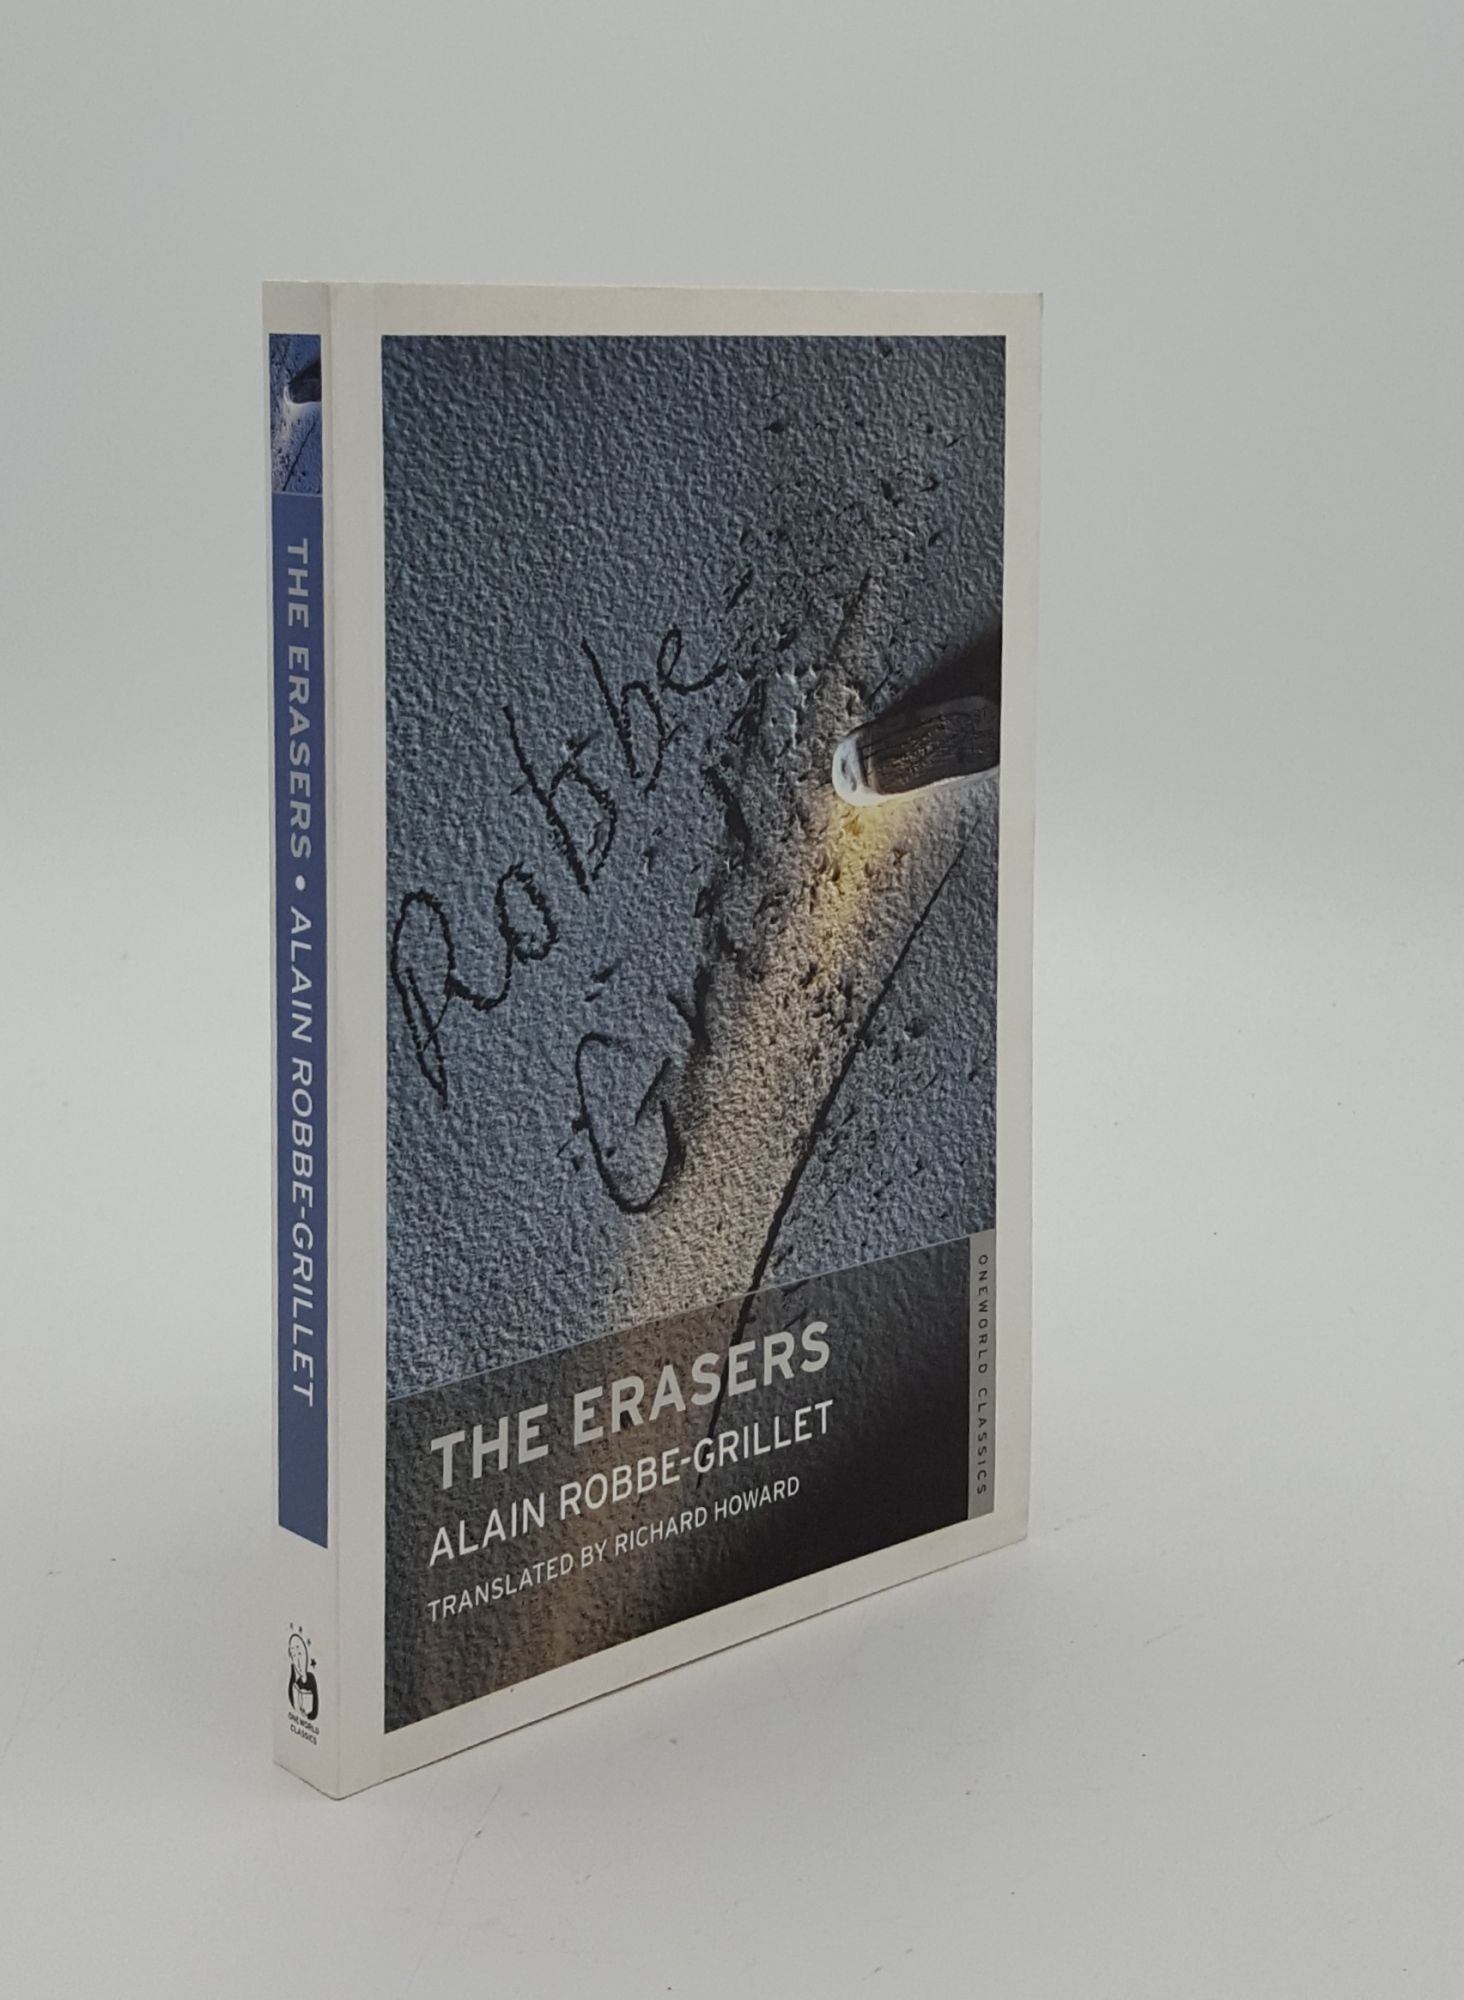 ROBBE-GRILLET Alain - The Erasers